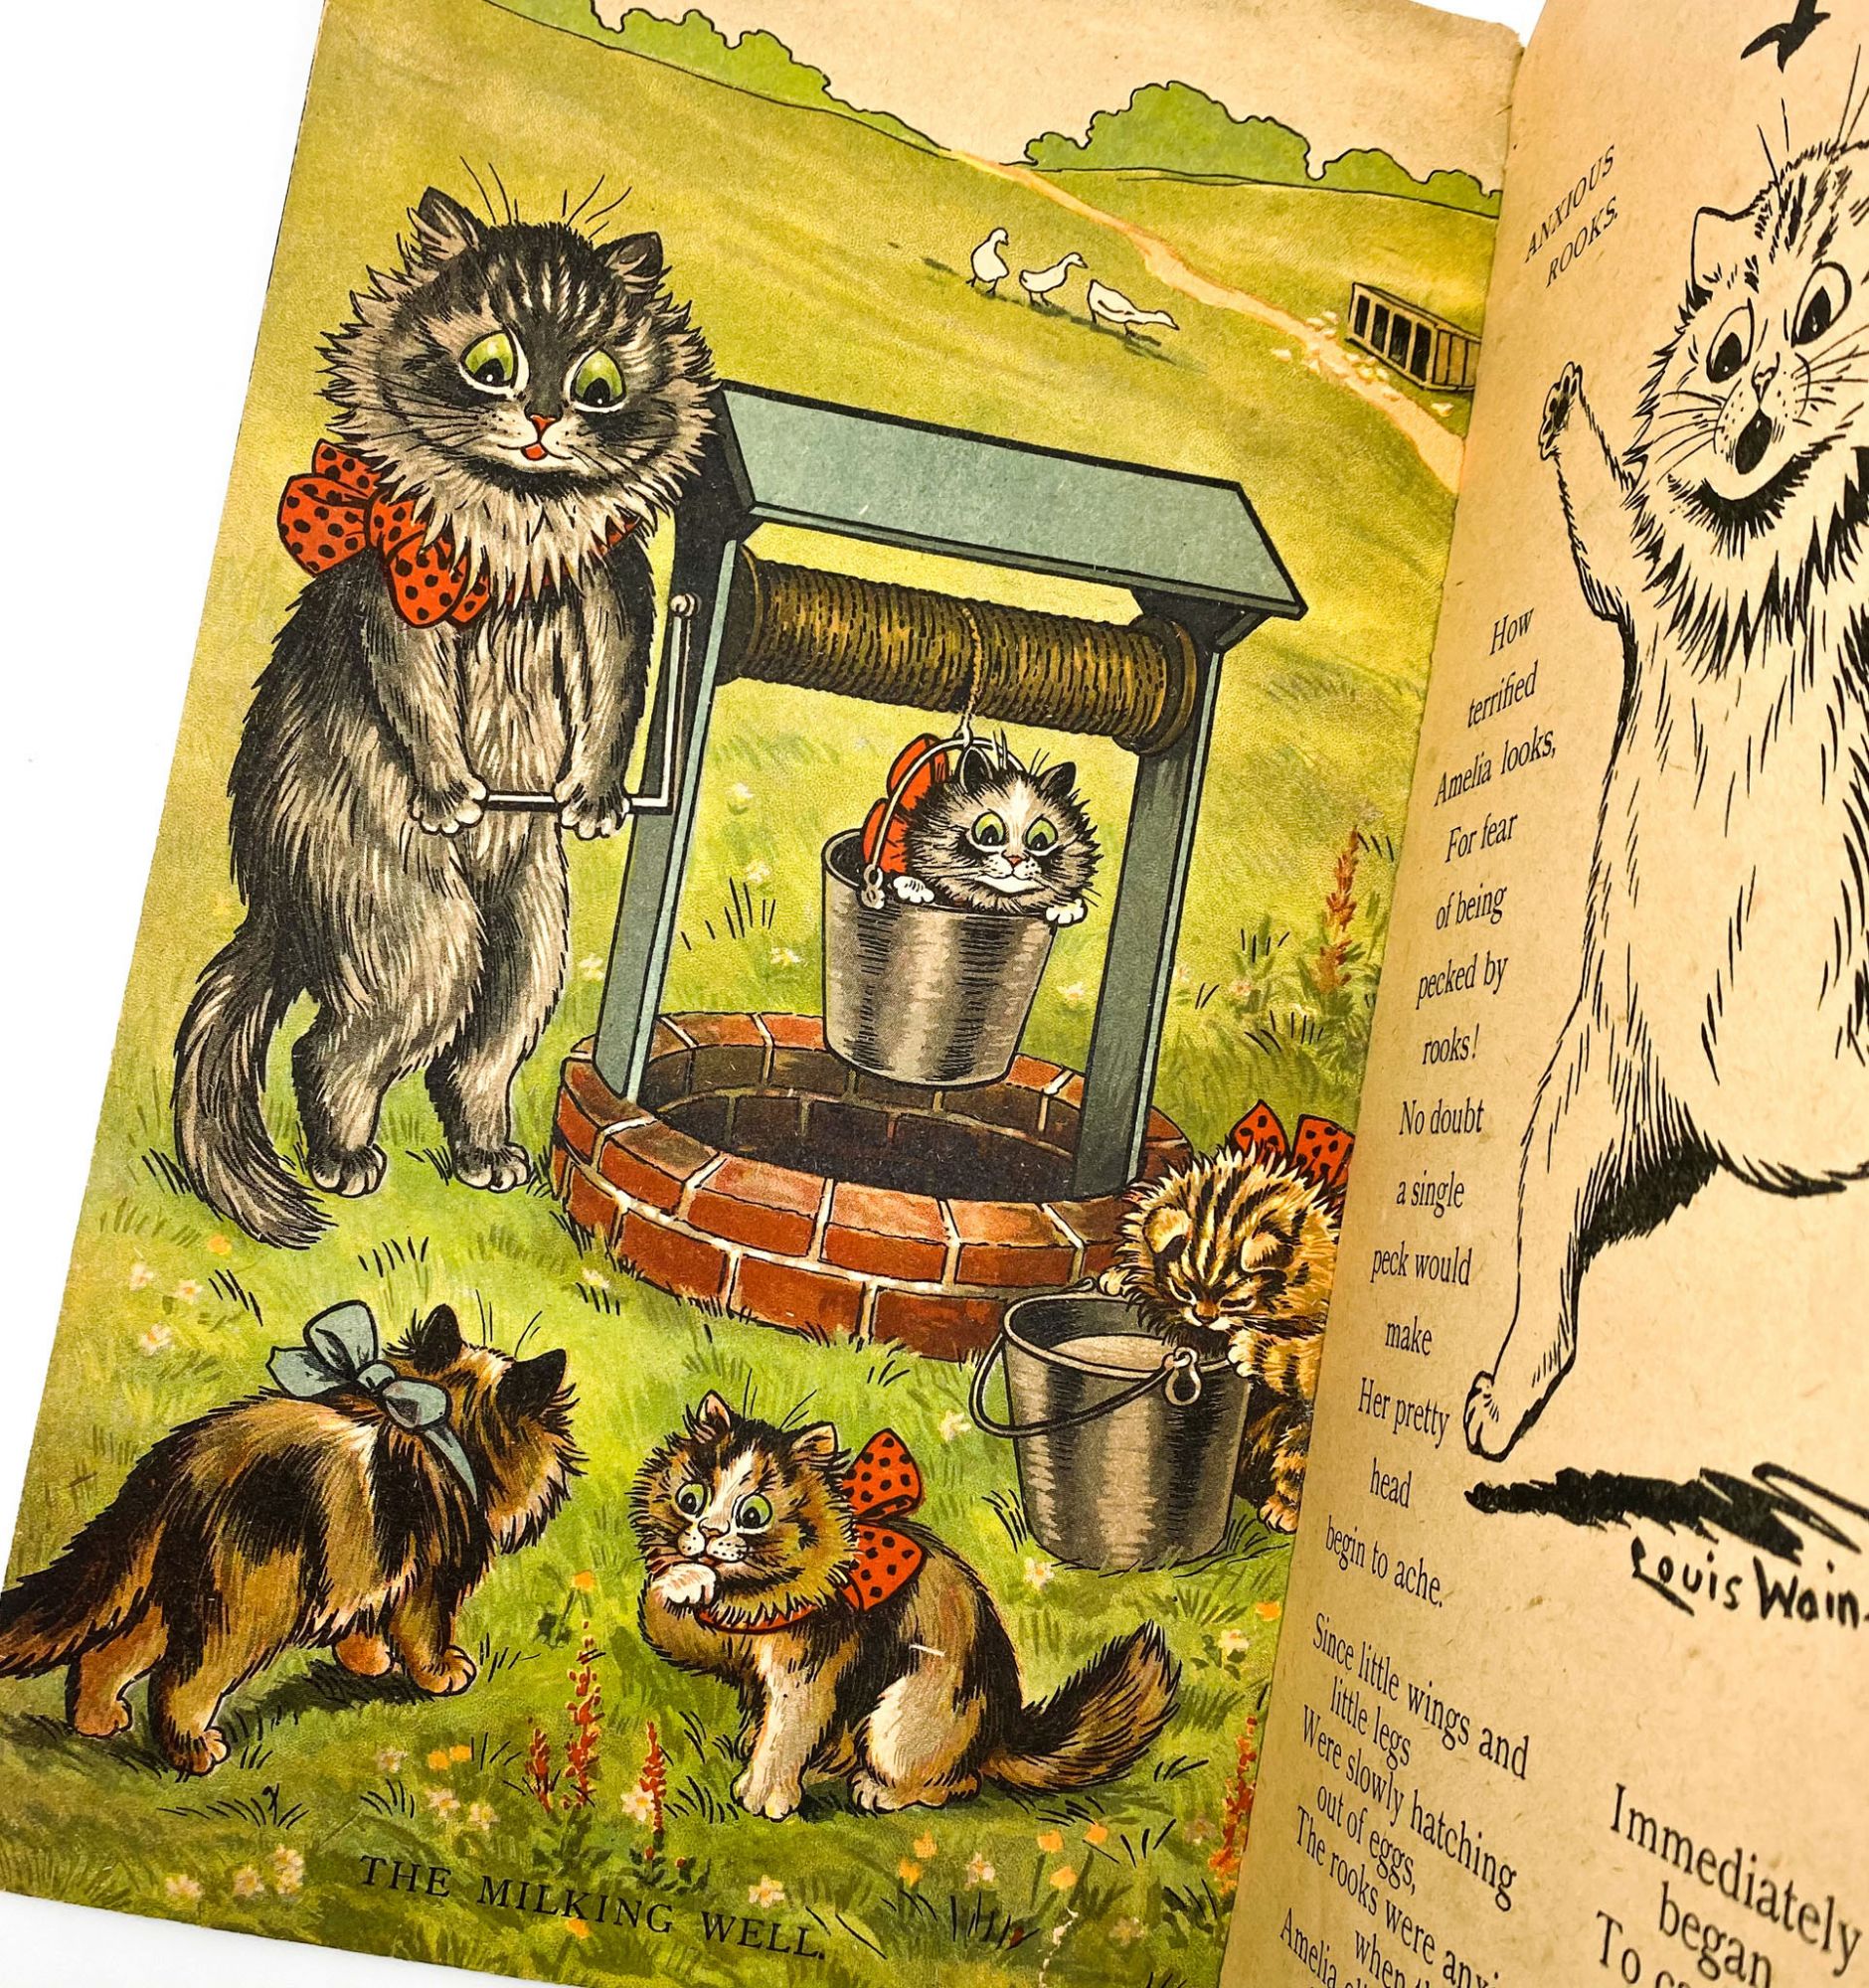 KITS AND CATS - WITH LOUIS WAIN IN PUSSYLAND by Norman Gale, Louis Wain on  Type Punch Matrix